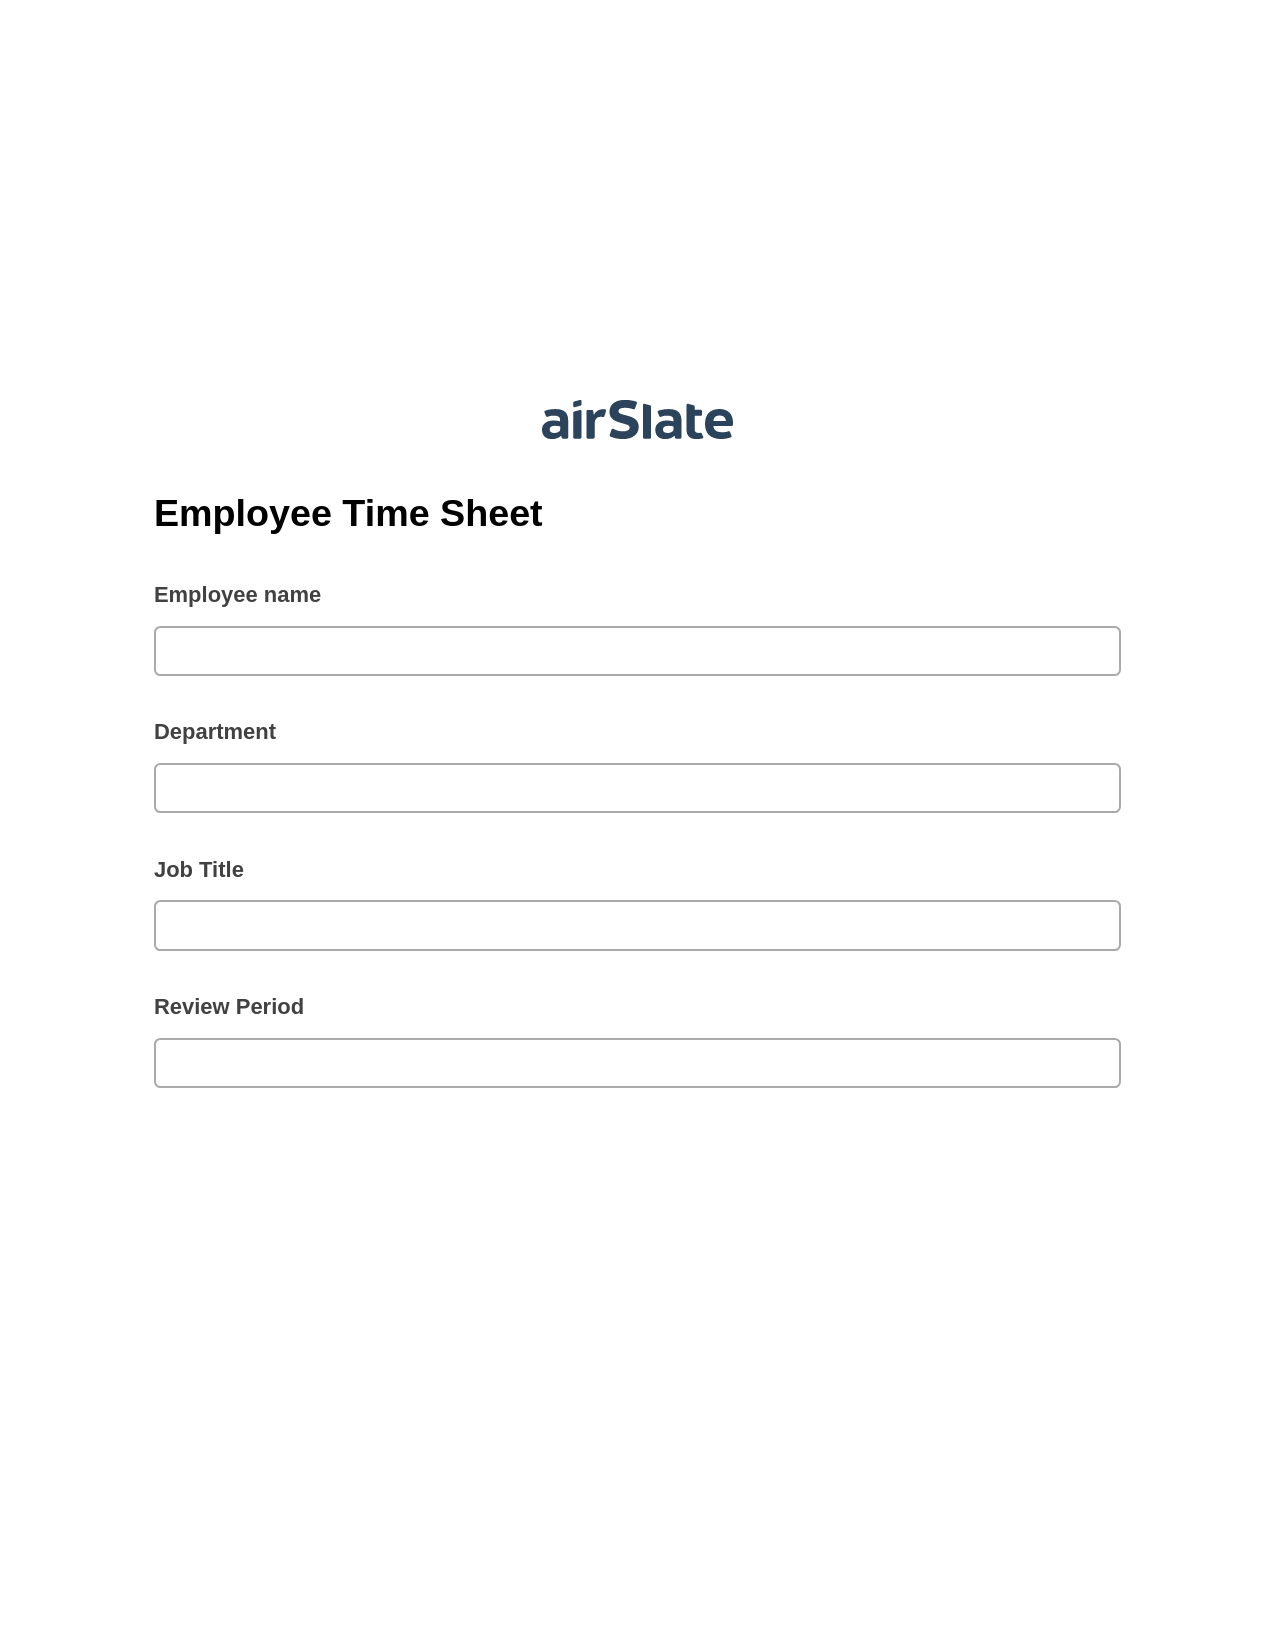 Multirole Employee Time Sheet Pre-fill Dropdowns from Airtable, Create Salesforce Records Bot, Export to Salesforce Record Bot